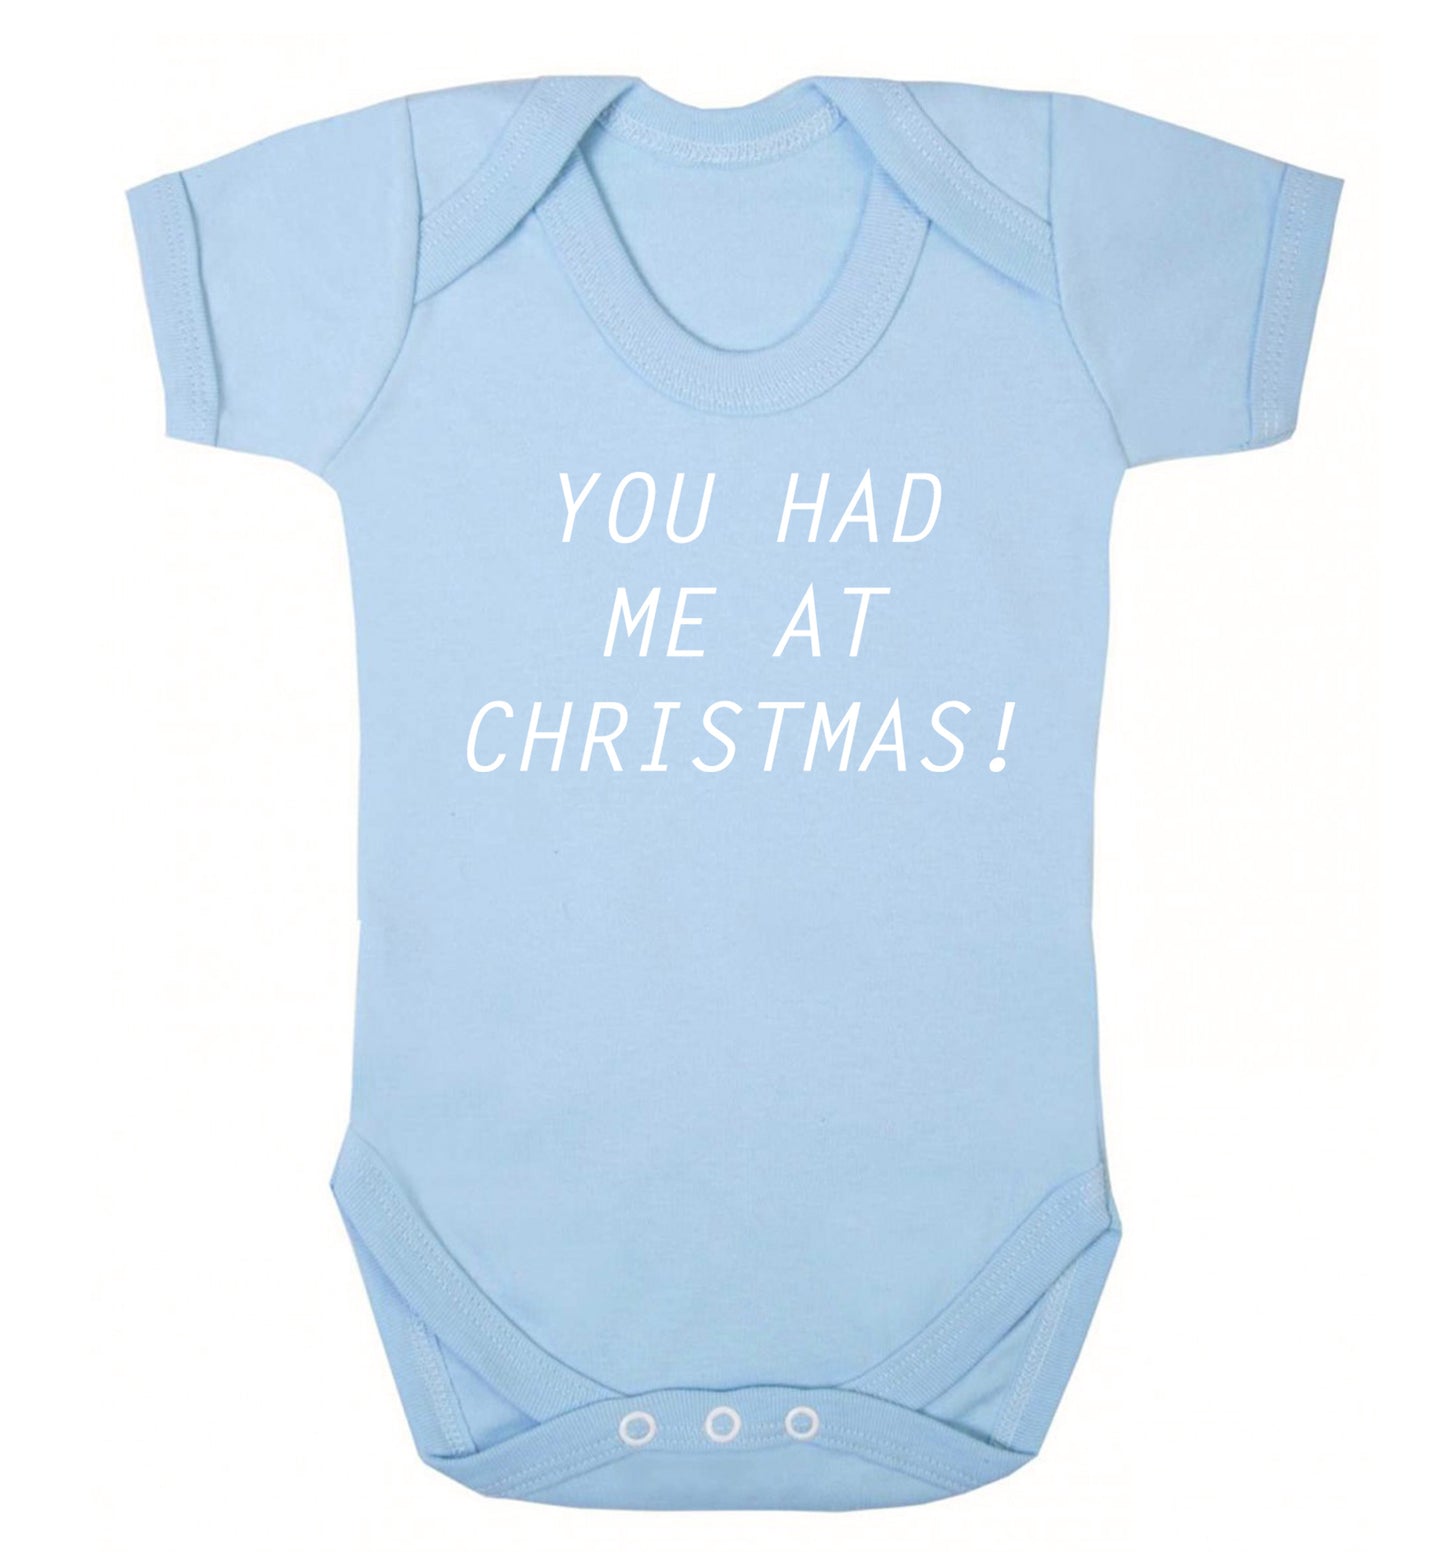 You had me at Christmas Baby Vest pale blue 18-24 months